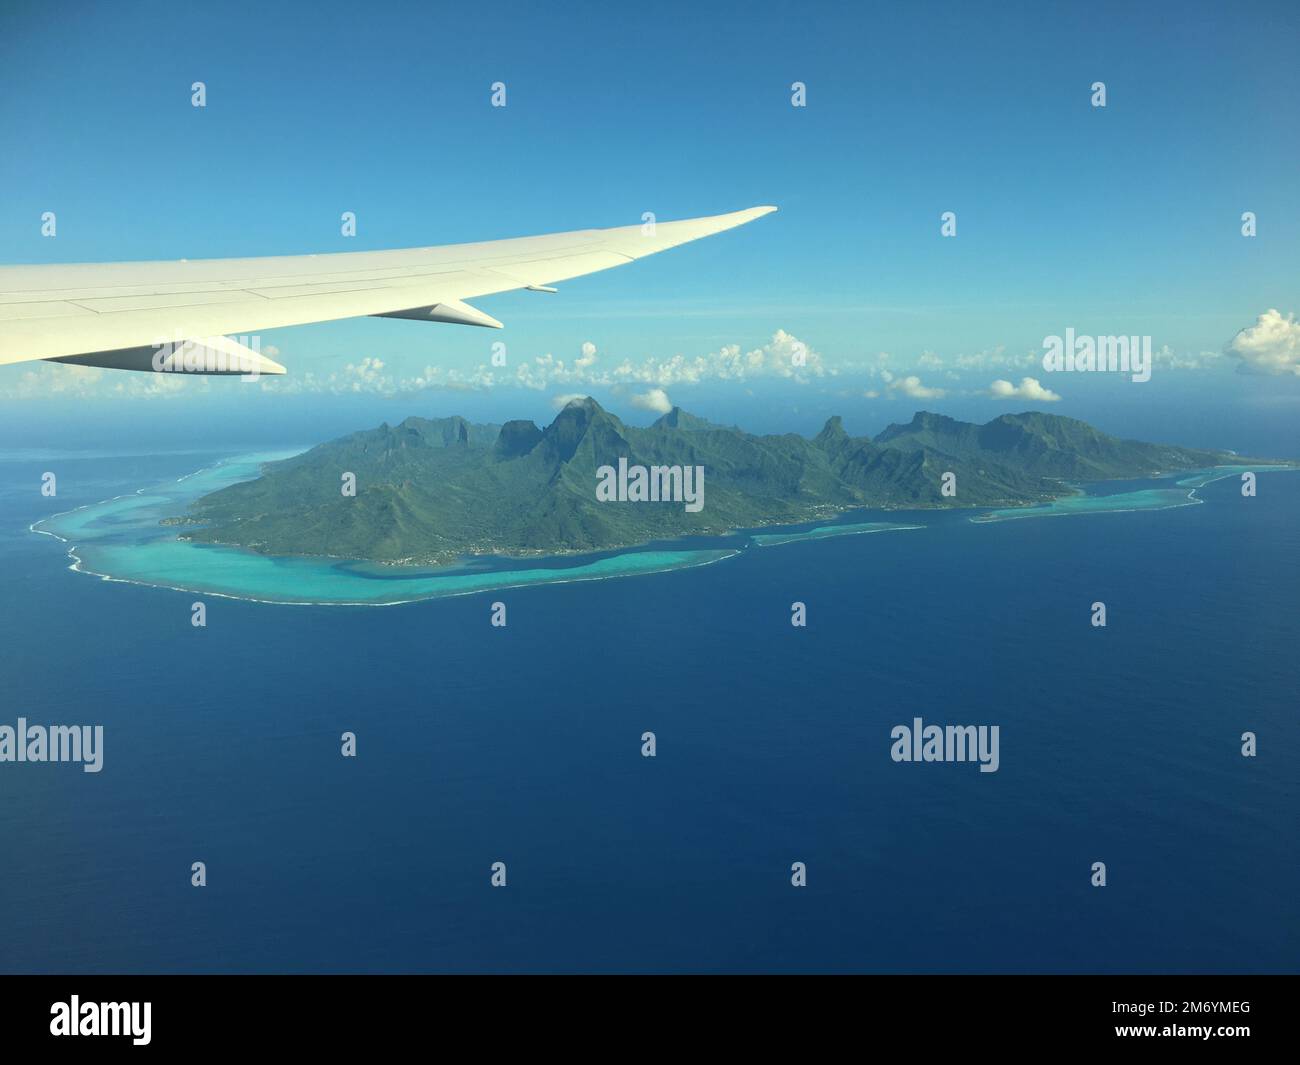 An aerial view of Mo'orea, French Polynesia with an airplane wing visible above it Stock Photo